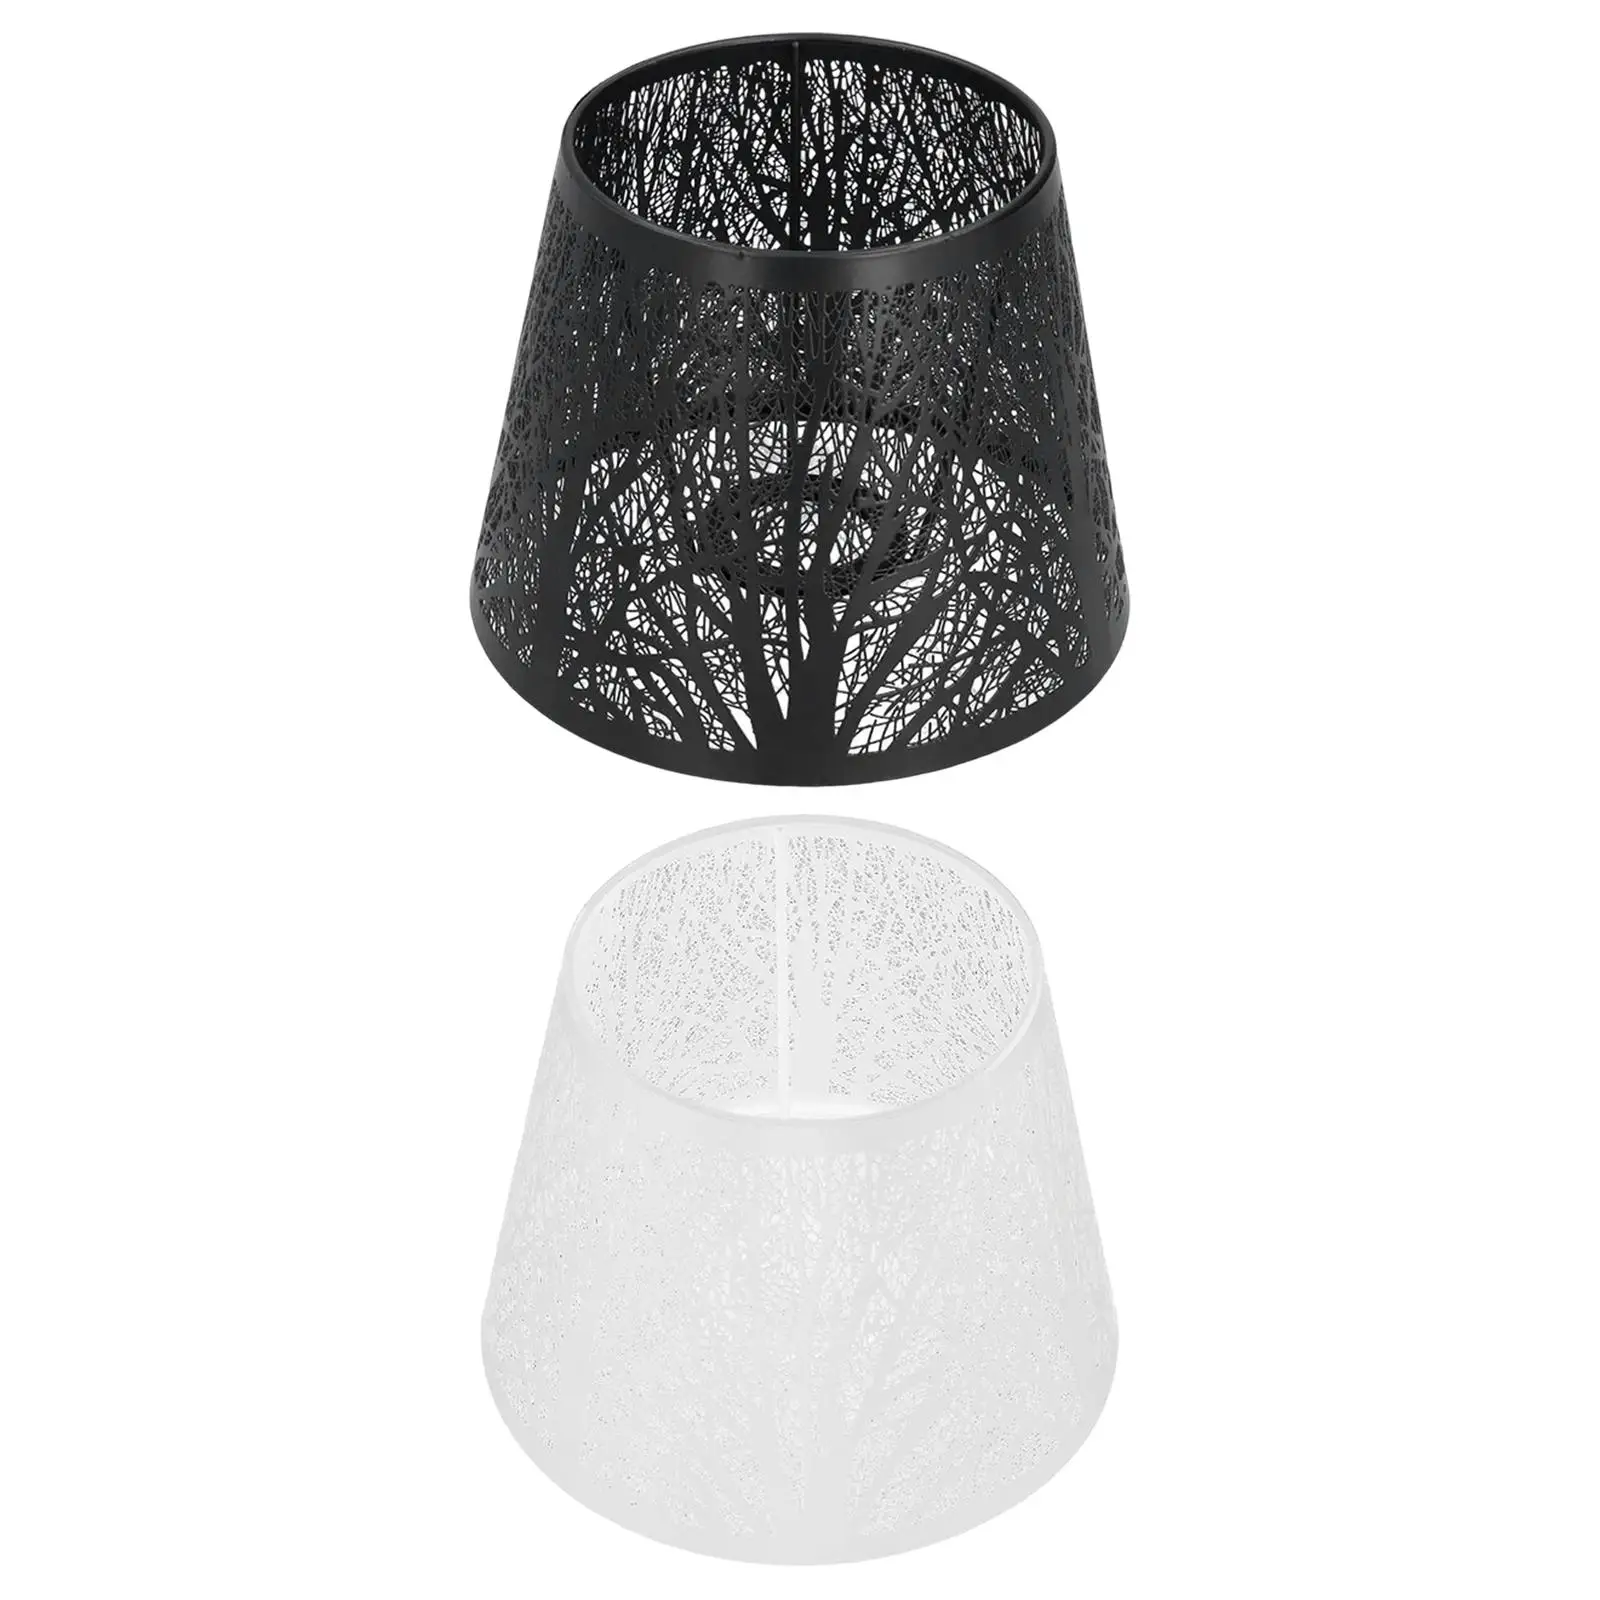 Modern Fashion Lamp Pattern Iron Lampshade for Table Lamp Living Room